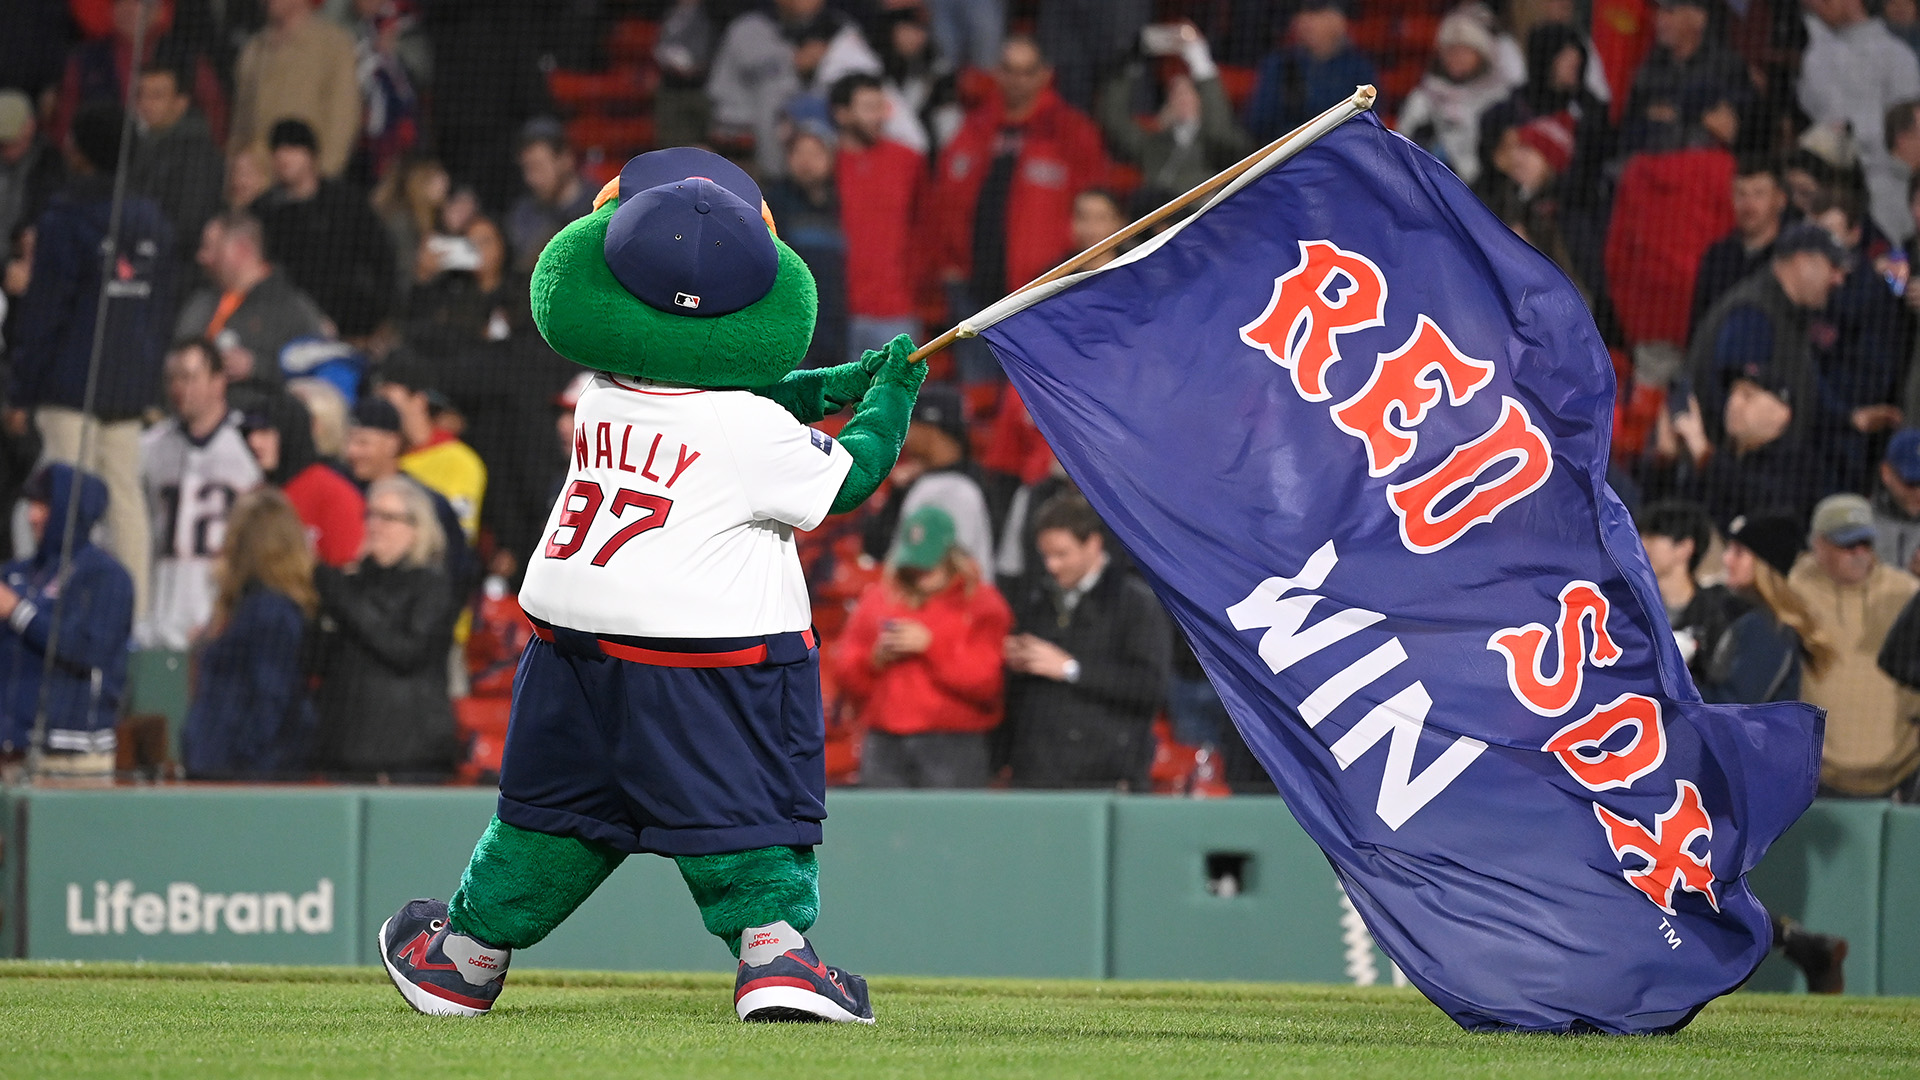 Ultimate Red Sox Show: Red Sox Take Care Of Business At Home [Video]